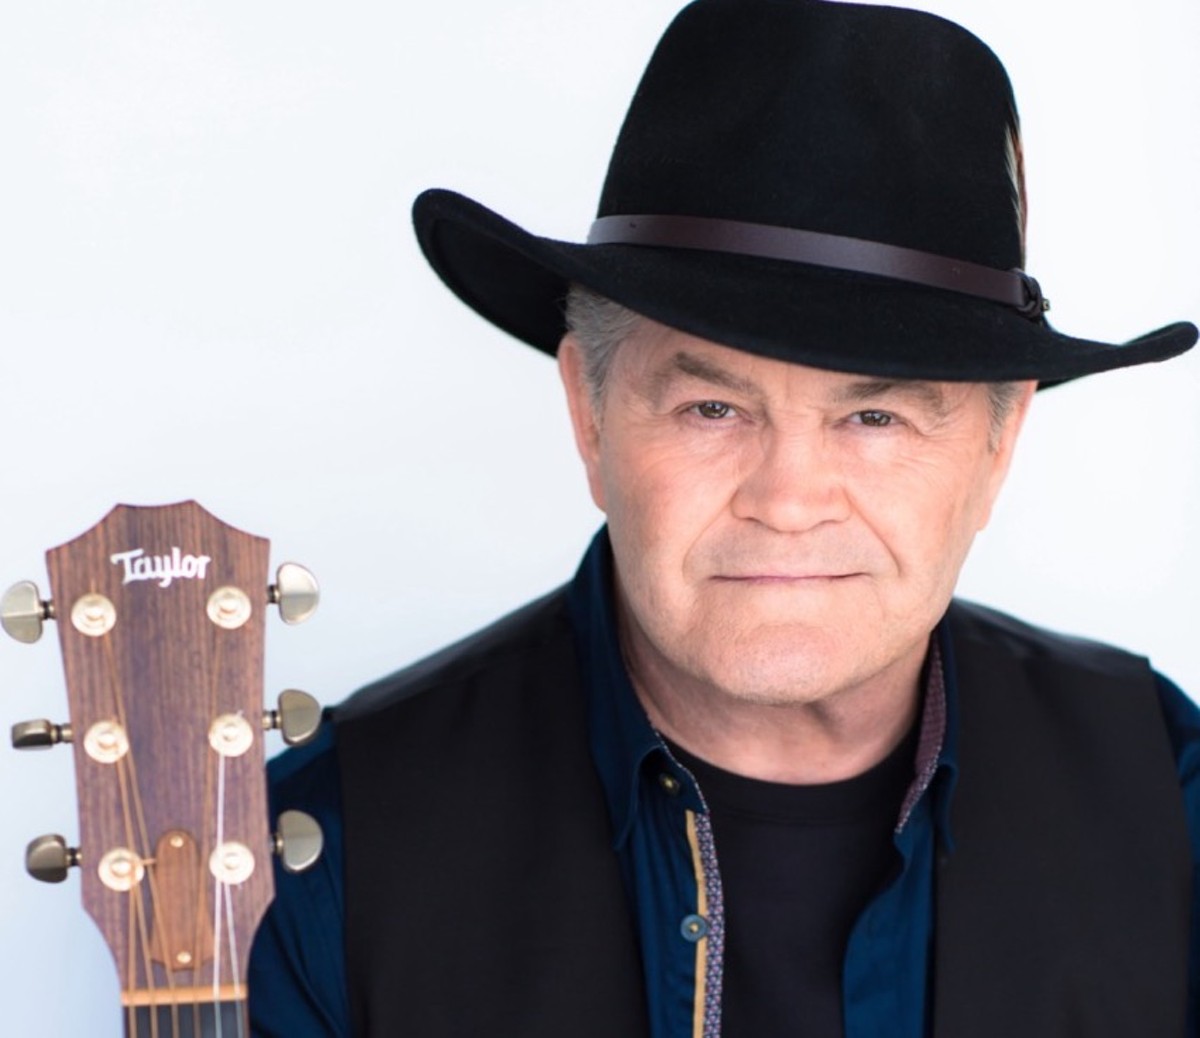 Micky Dolenz will appear at Abby Road on the River, Thursday May 25.